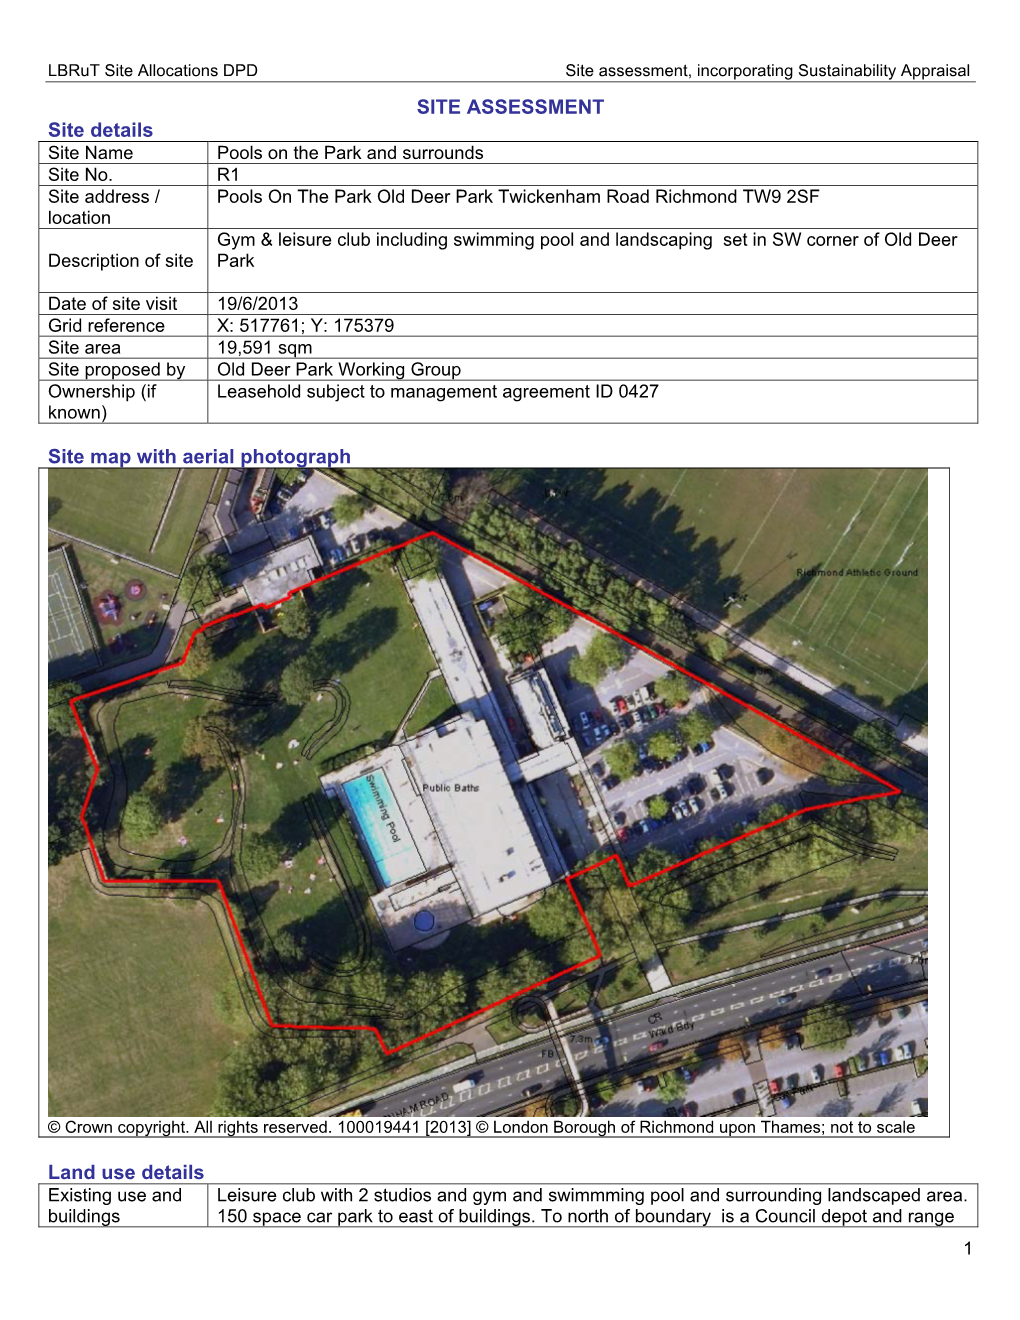 Lbrut Site Allocations DPD Site Assessment, Incorporating Sustainability Appraisal SITE ASSESSMENT Site Details Site Name Pools on the Park and Surrounds Site No